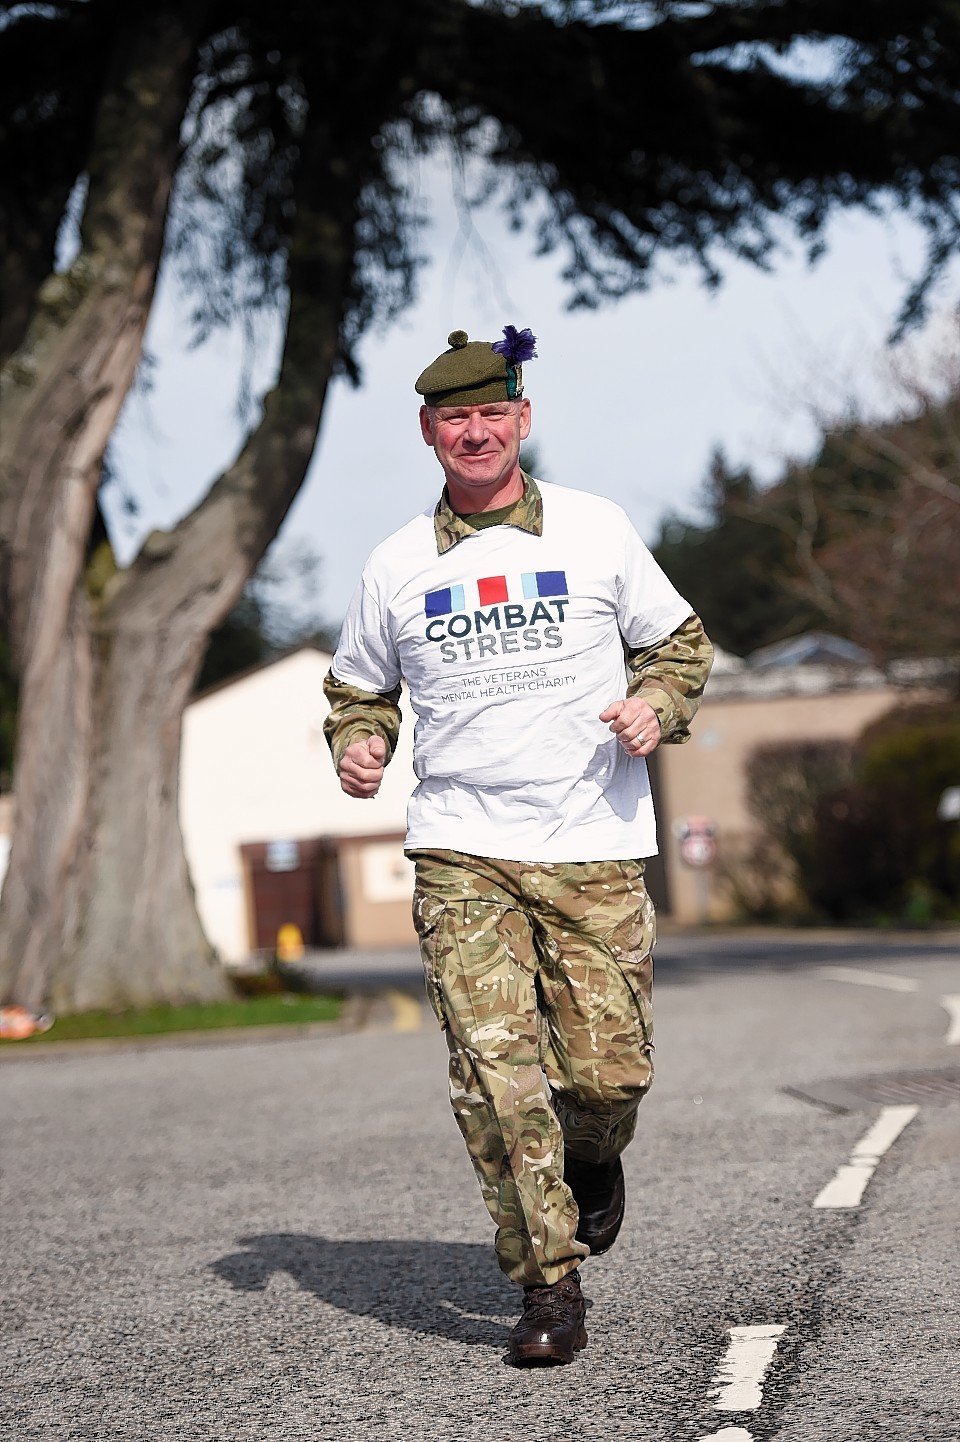 Doug Hamilton, at Baxters where he works, in training for the London Marathon to raise money for Combat Stress. (Picture: Gordon Lennox)